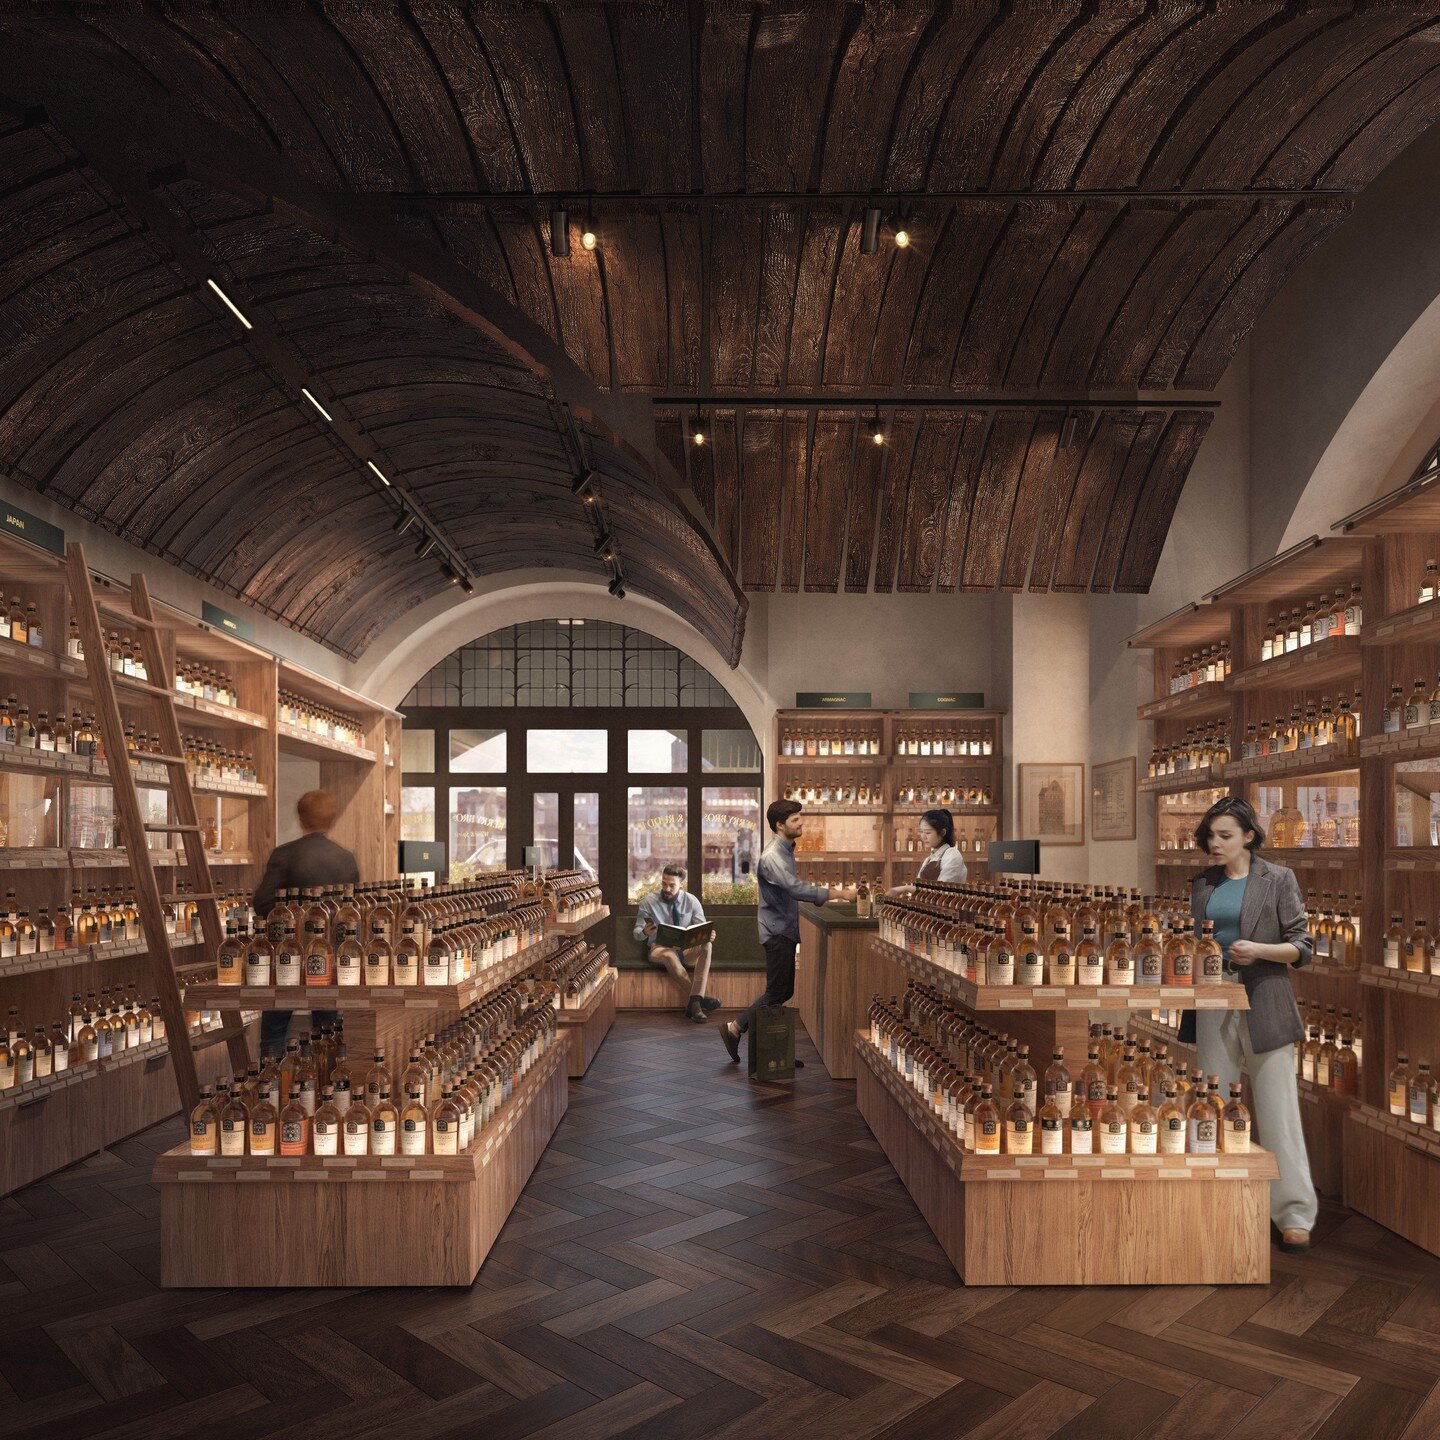 We have been keeping the interior design for Berry Bros. &amp; Rudd&rsquo;s new spirits shop under wraps until now. This image shows how we are adapting Norman Shaw&rsquo;s Old Assurance Headquarters into a premium retail space. Progress is well unde